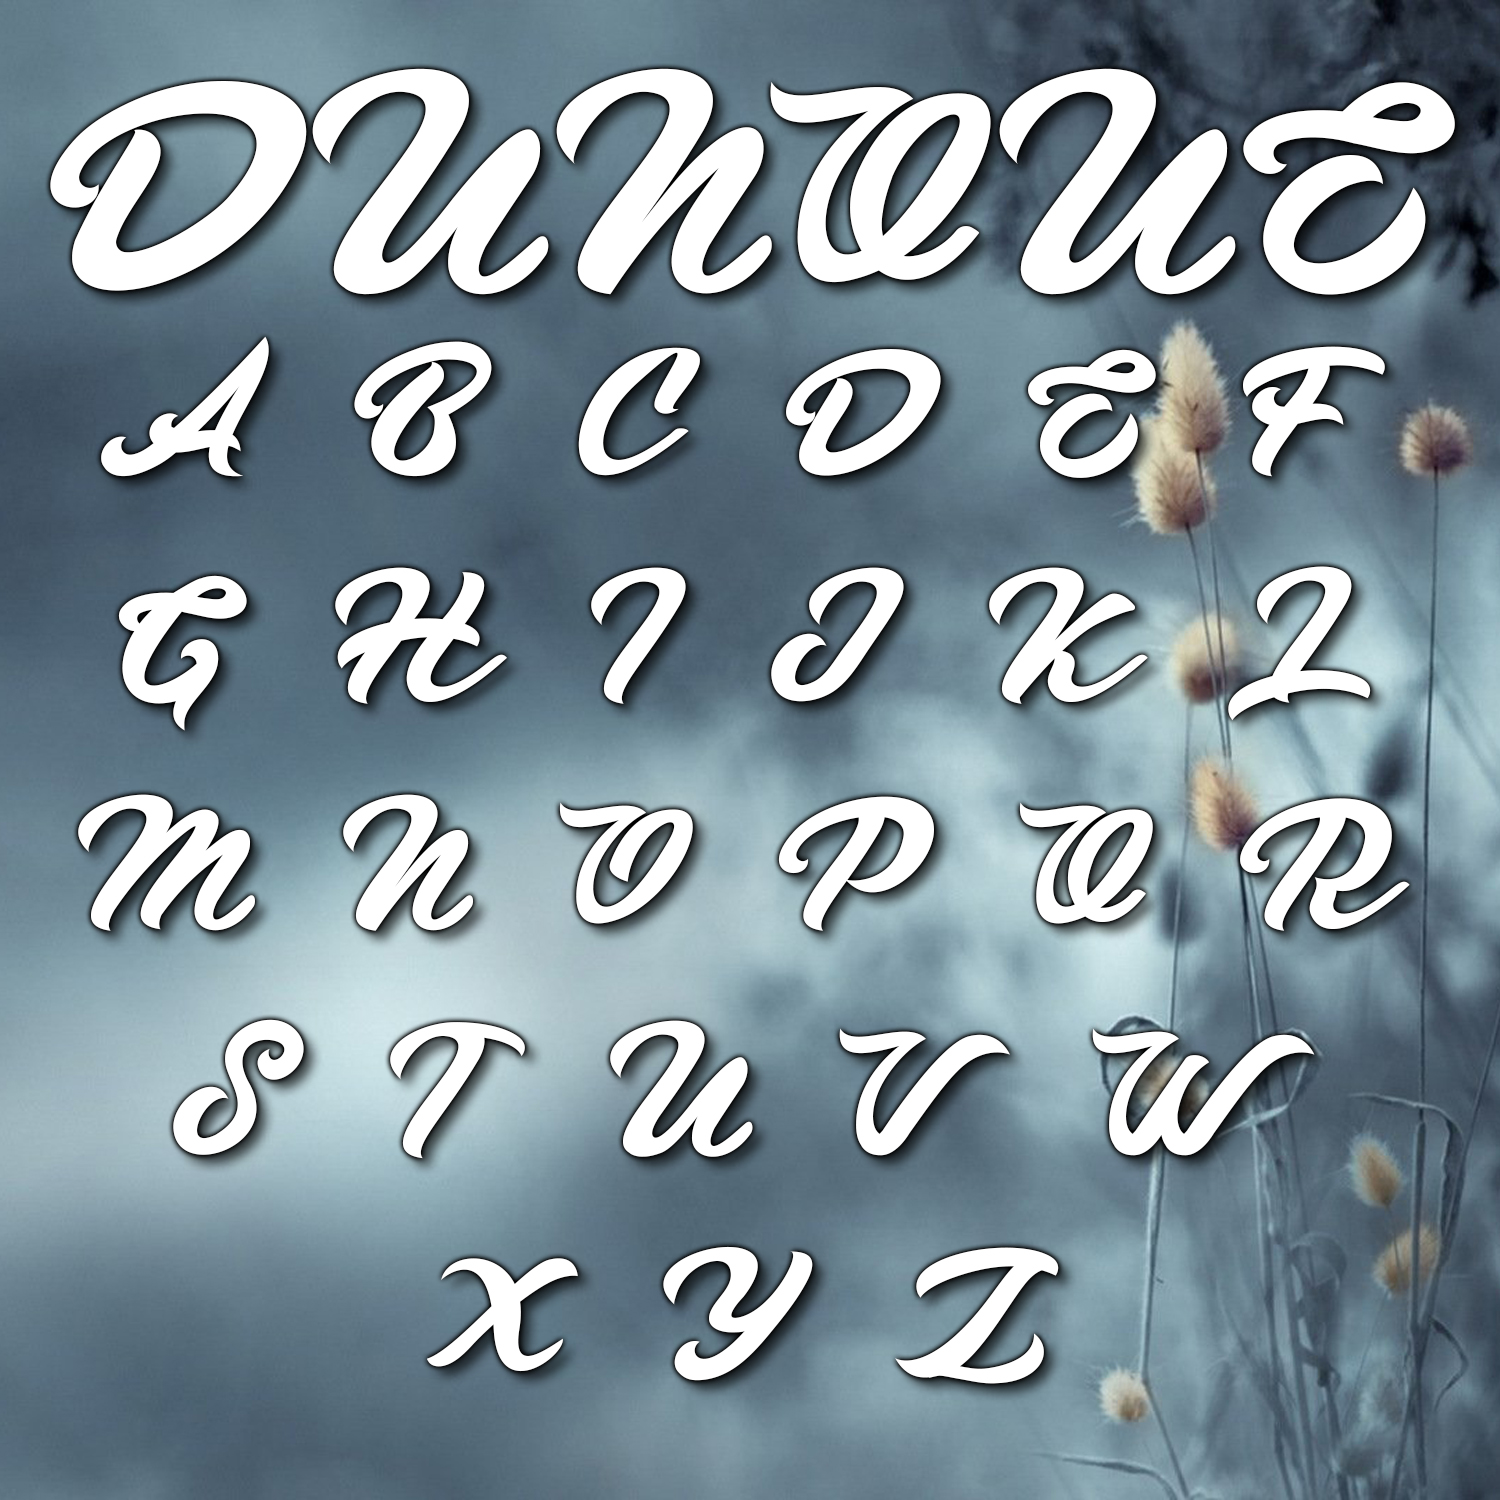 Alphabet preview in font style.